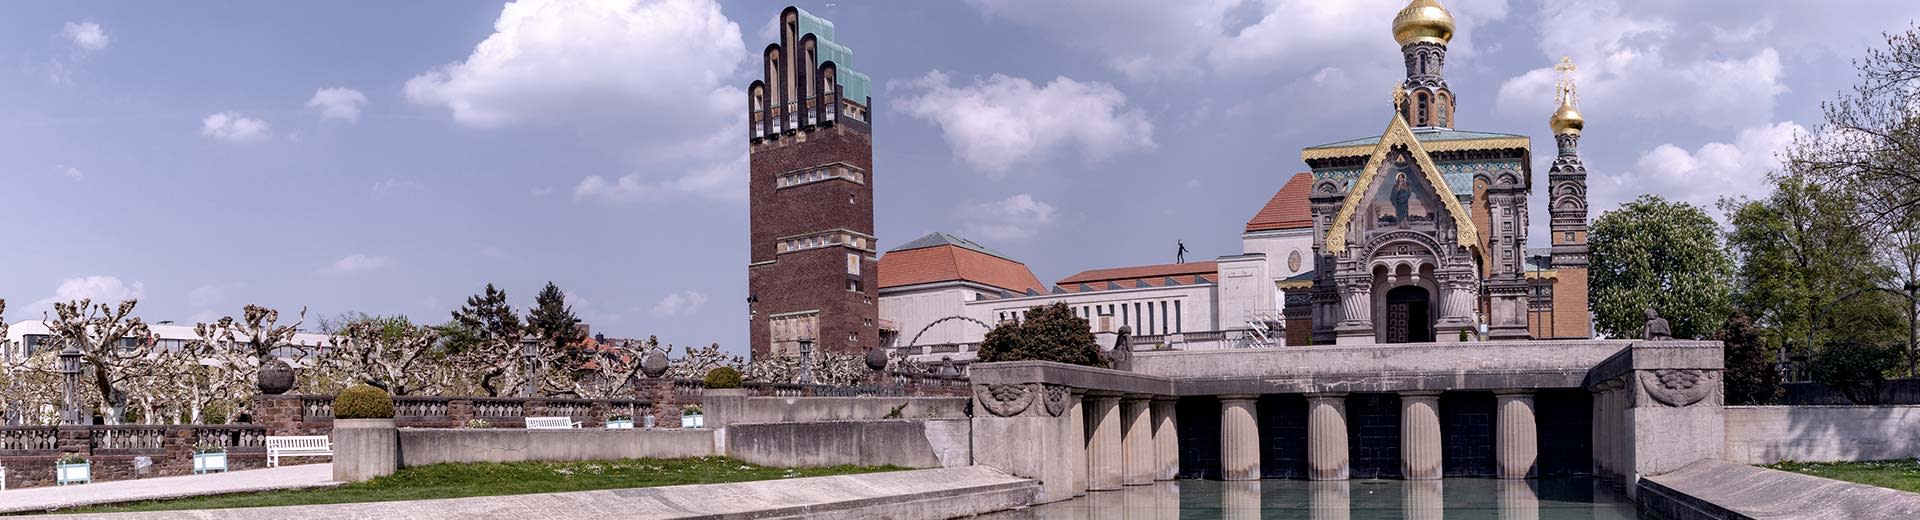 The historic churches and buildings of Darmstadt sit next to a canal on a clear and sunny day.